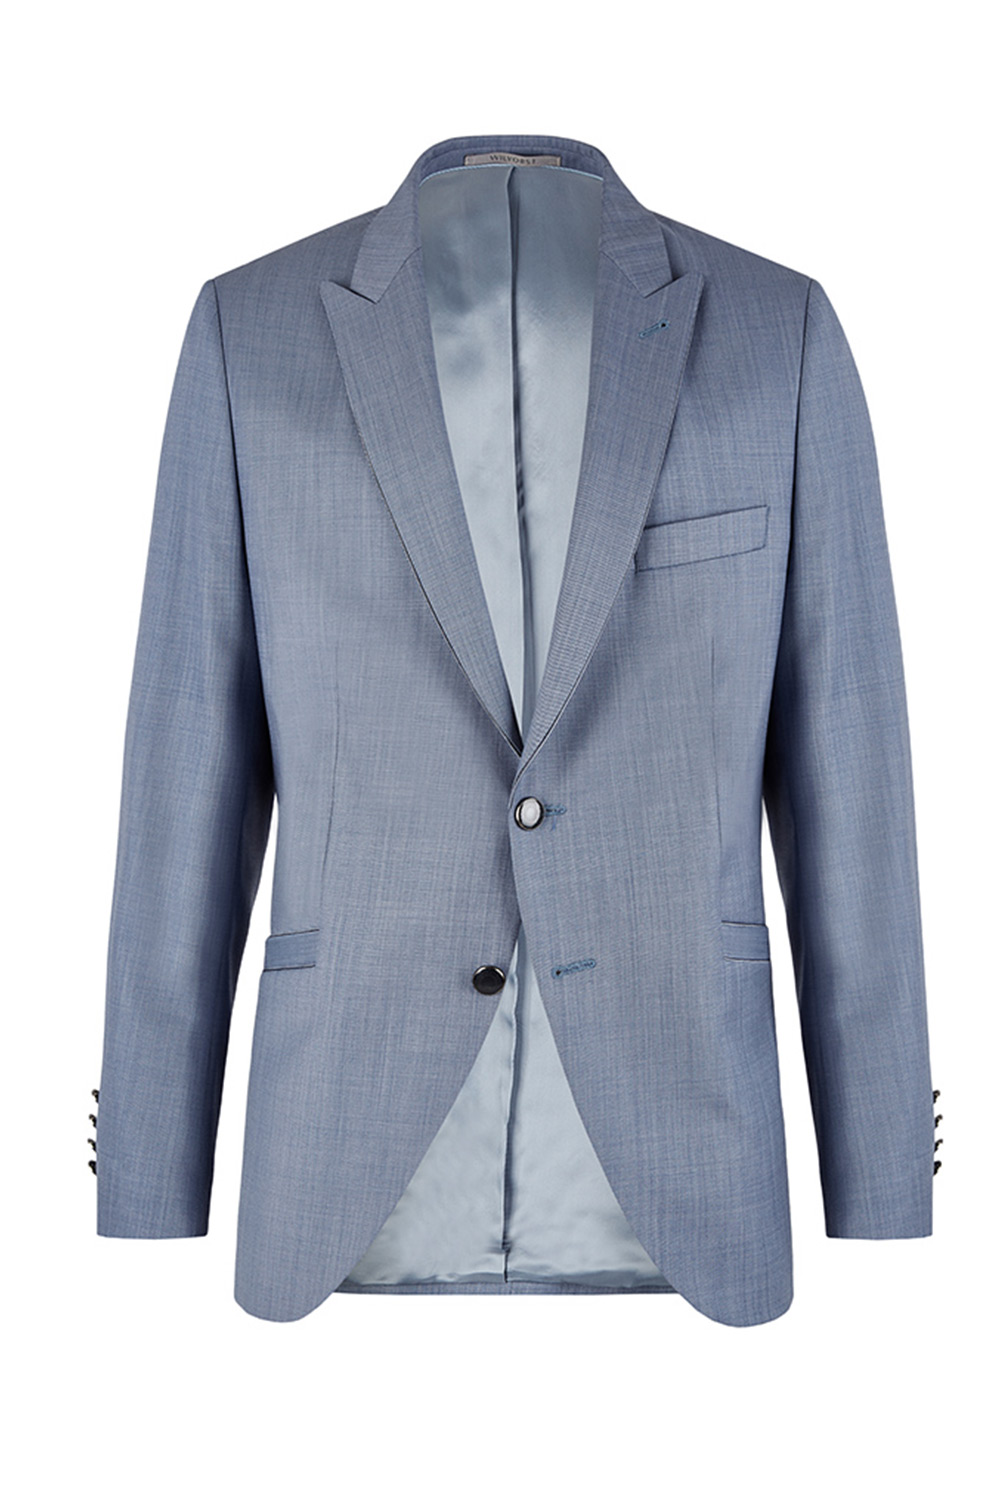 Silver Drop 8 3 Piece Suit - Tom Murphy's Formal and Menswear